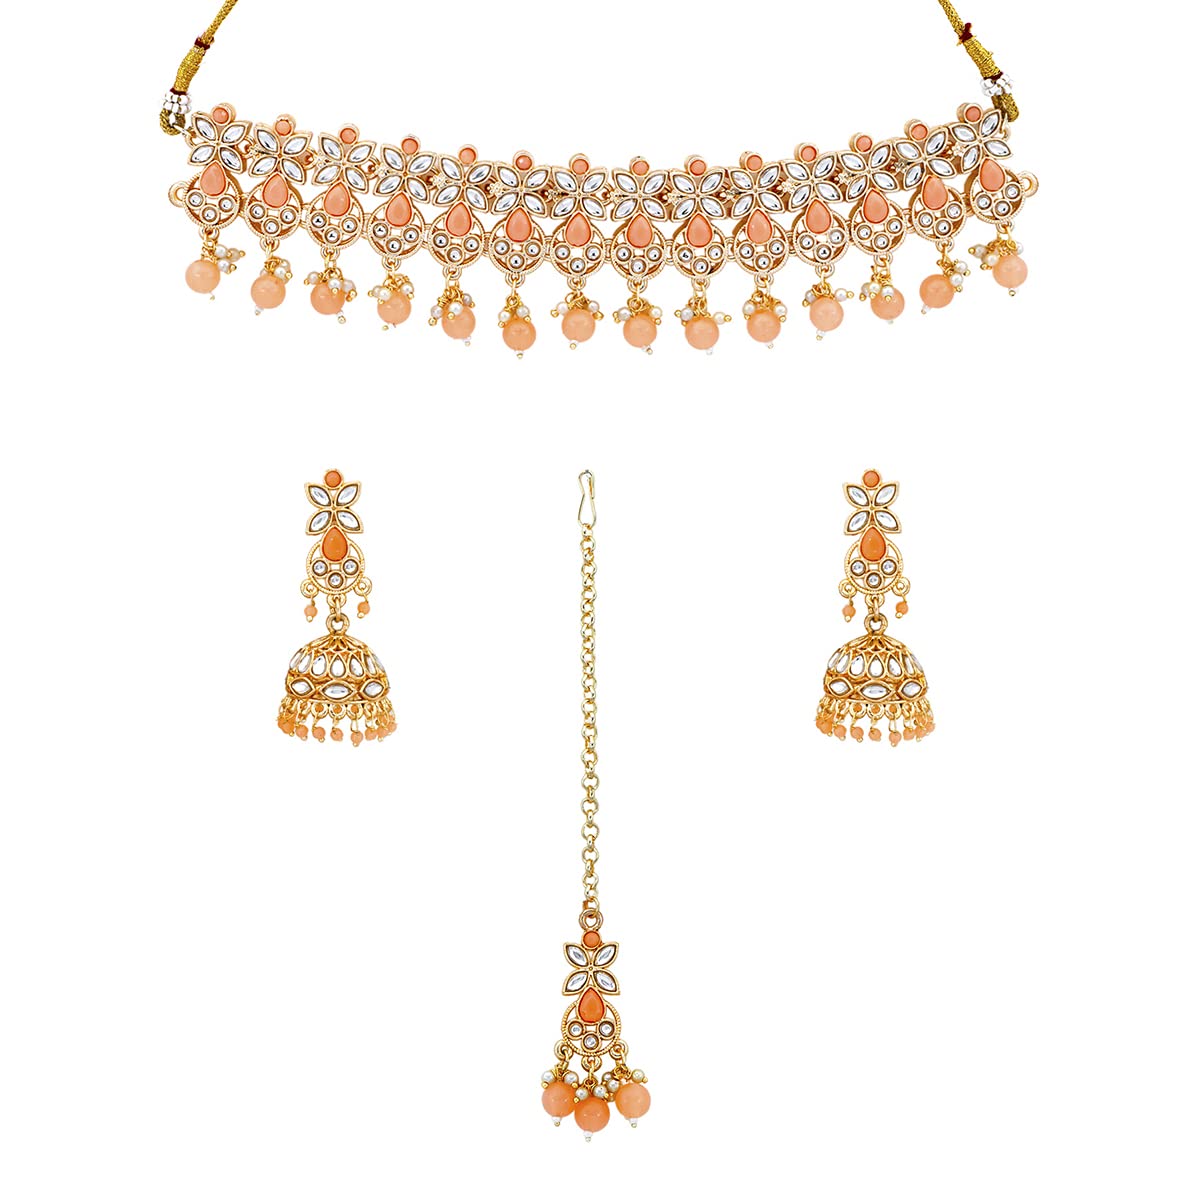 Yellow Chimes Jewellery Set for Women and Girls Kundan Necklace Set for Girls | Gold Plated Beads Drop Kundan Choker Necklace Set | Birthday Gift for girls and women Anniversary Gift for Wife